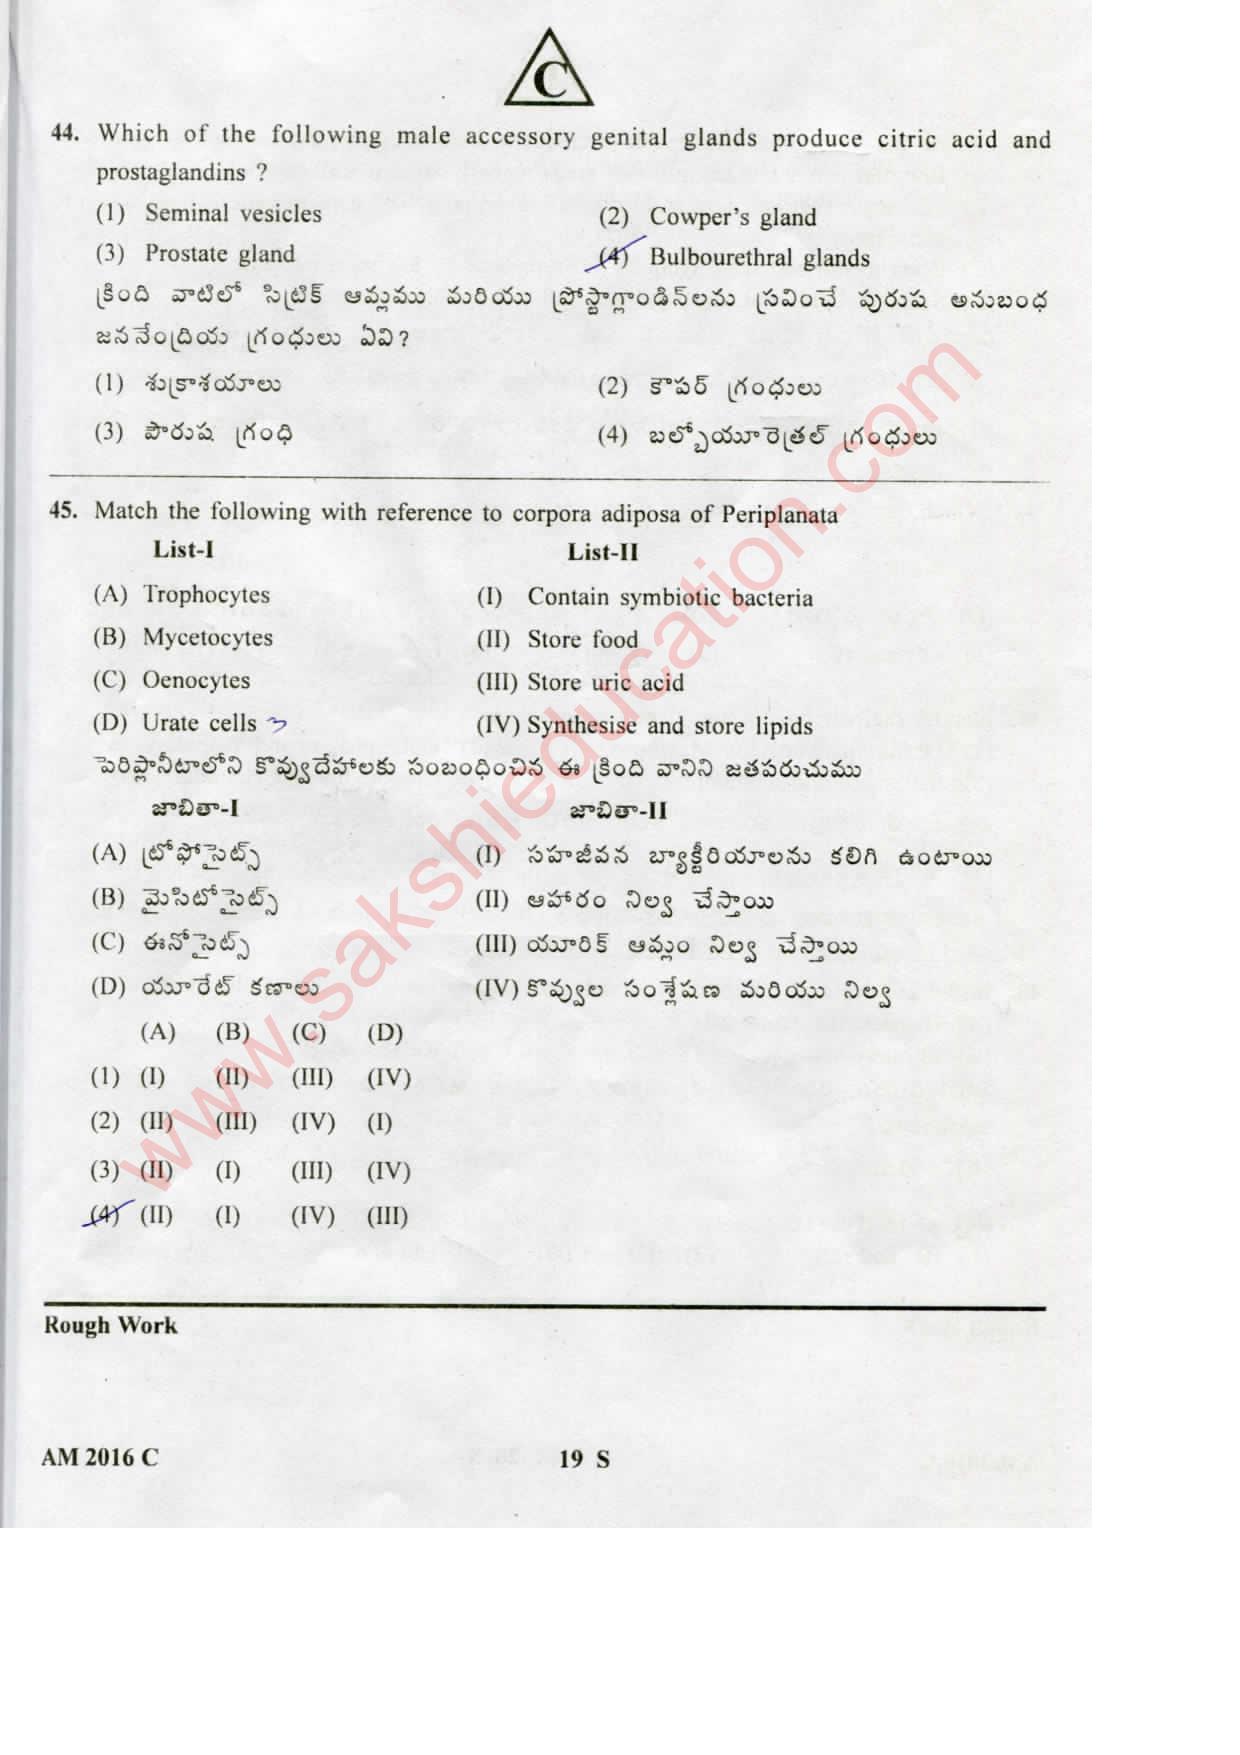 TS EAMCET 2016 Medical Question Paper with Key (Held on 15 May 2016) - Page 19